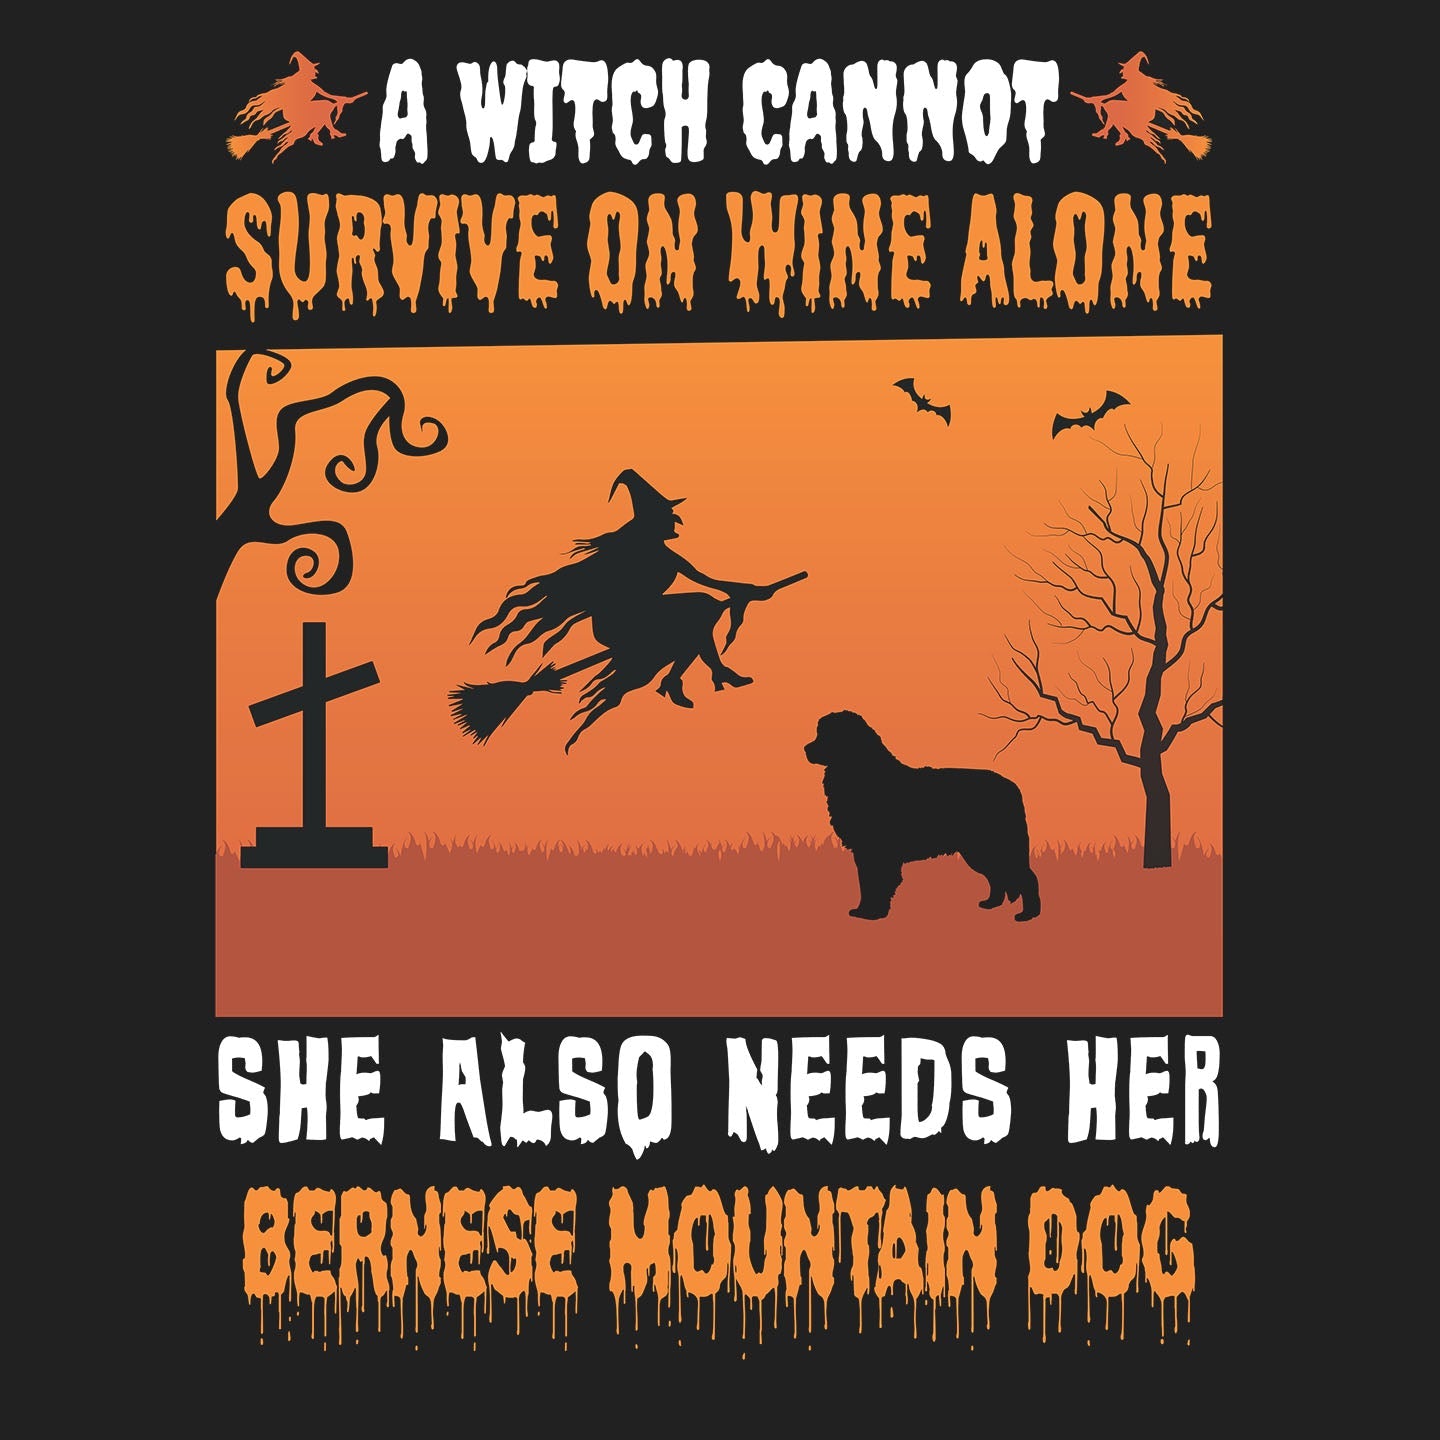 A Witch Needs Her Bernese Mountain Dog - Adult Unisex T-Shirt